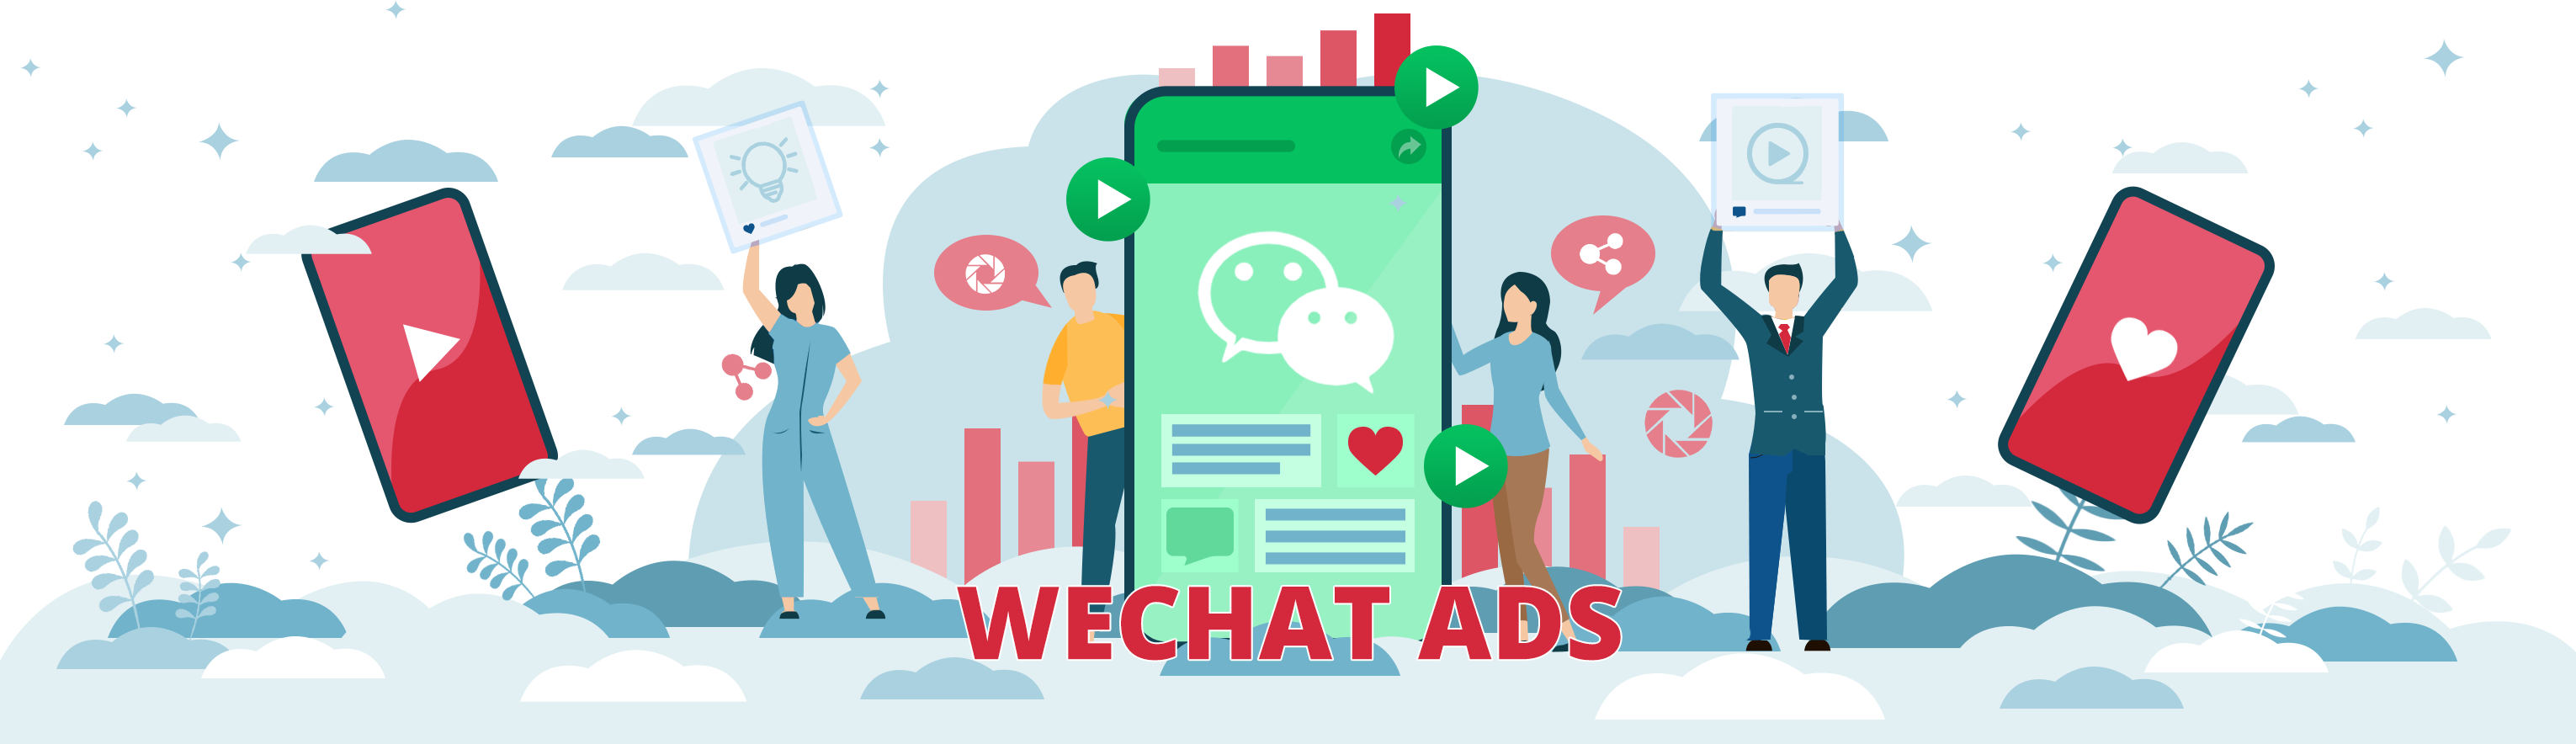 How to advertising on WeChat?